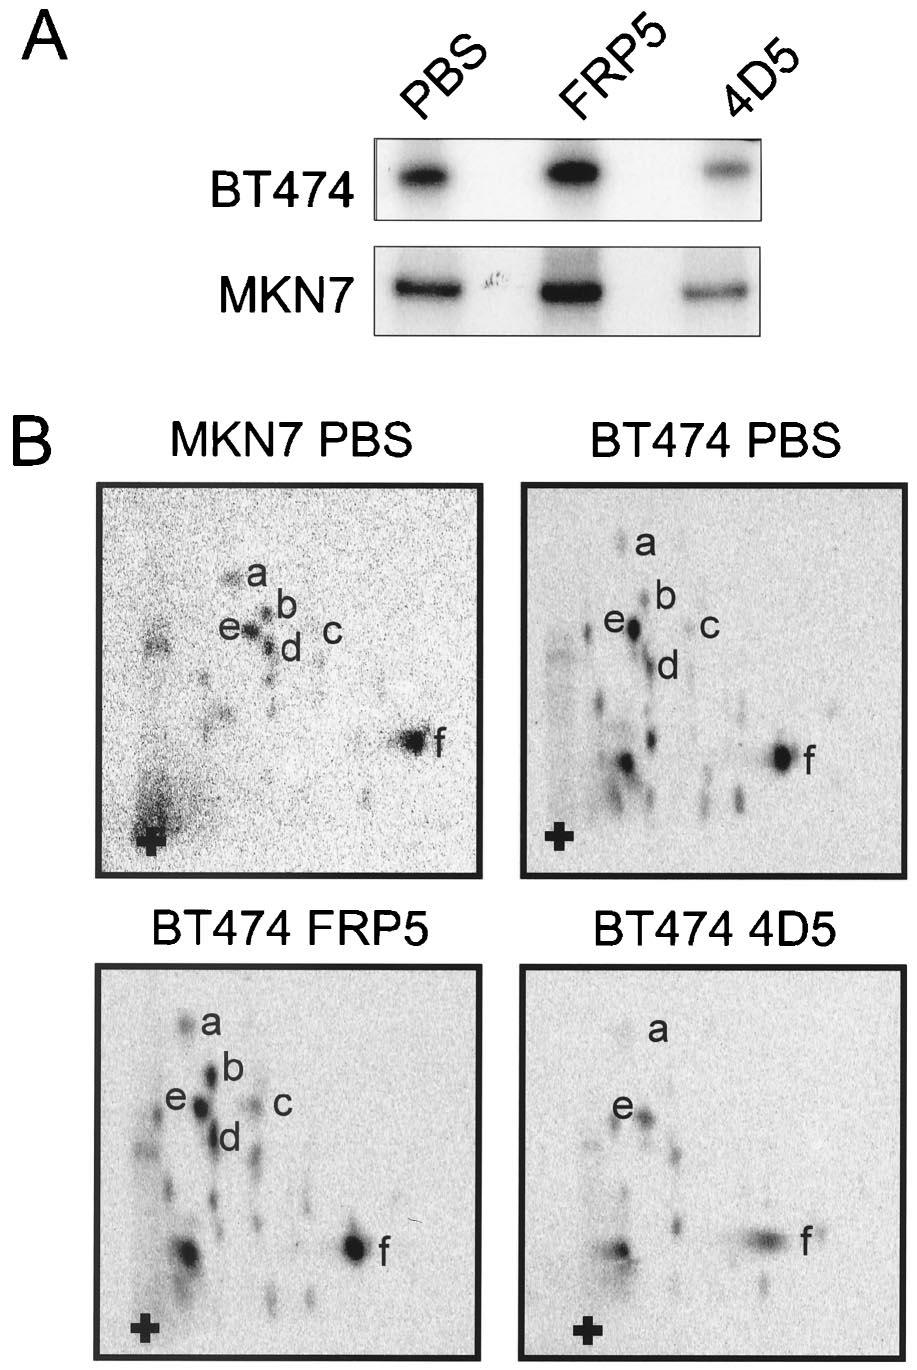 3214 LANE ET AL. MOL. CELL. BIOL. FIG. 4. Analysis of PKB and Erk1/2 phosphorylation after treatment of BT474 and MKN7 cells with anti-erbb2 antibodies.